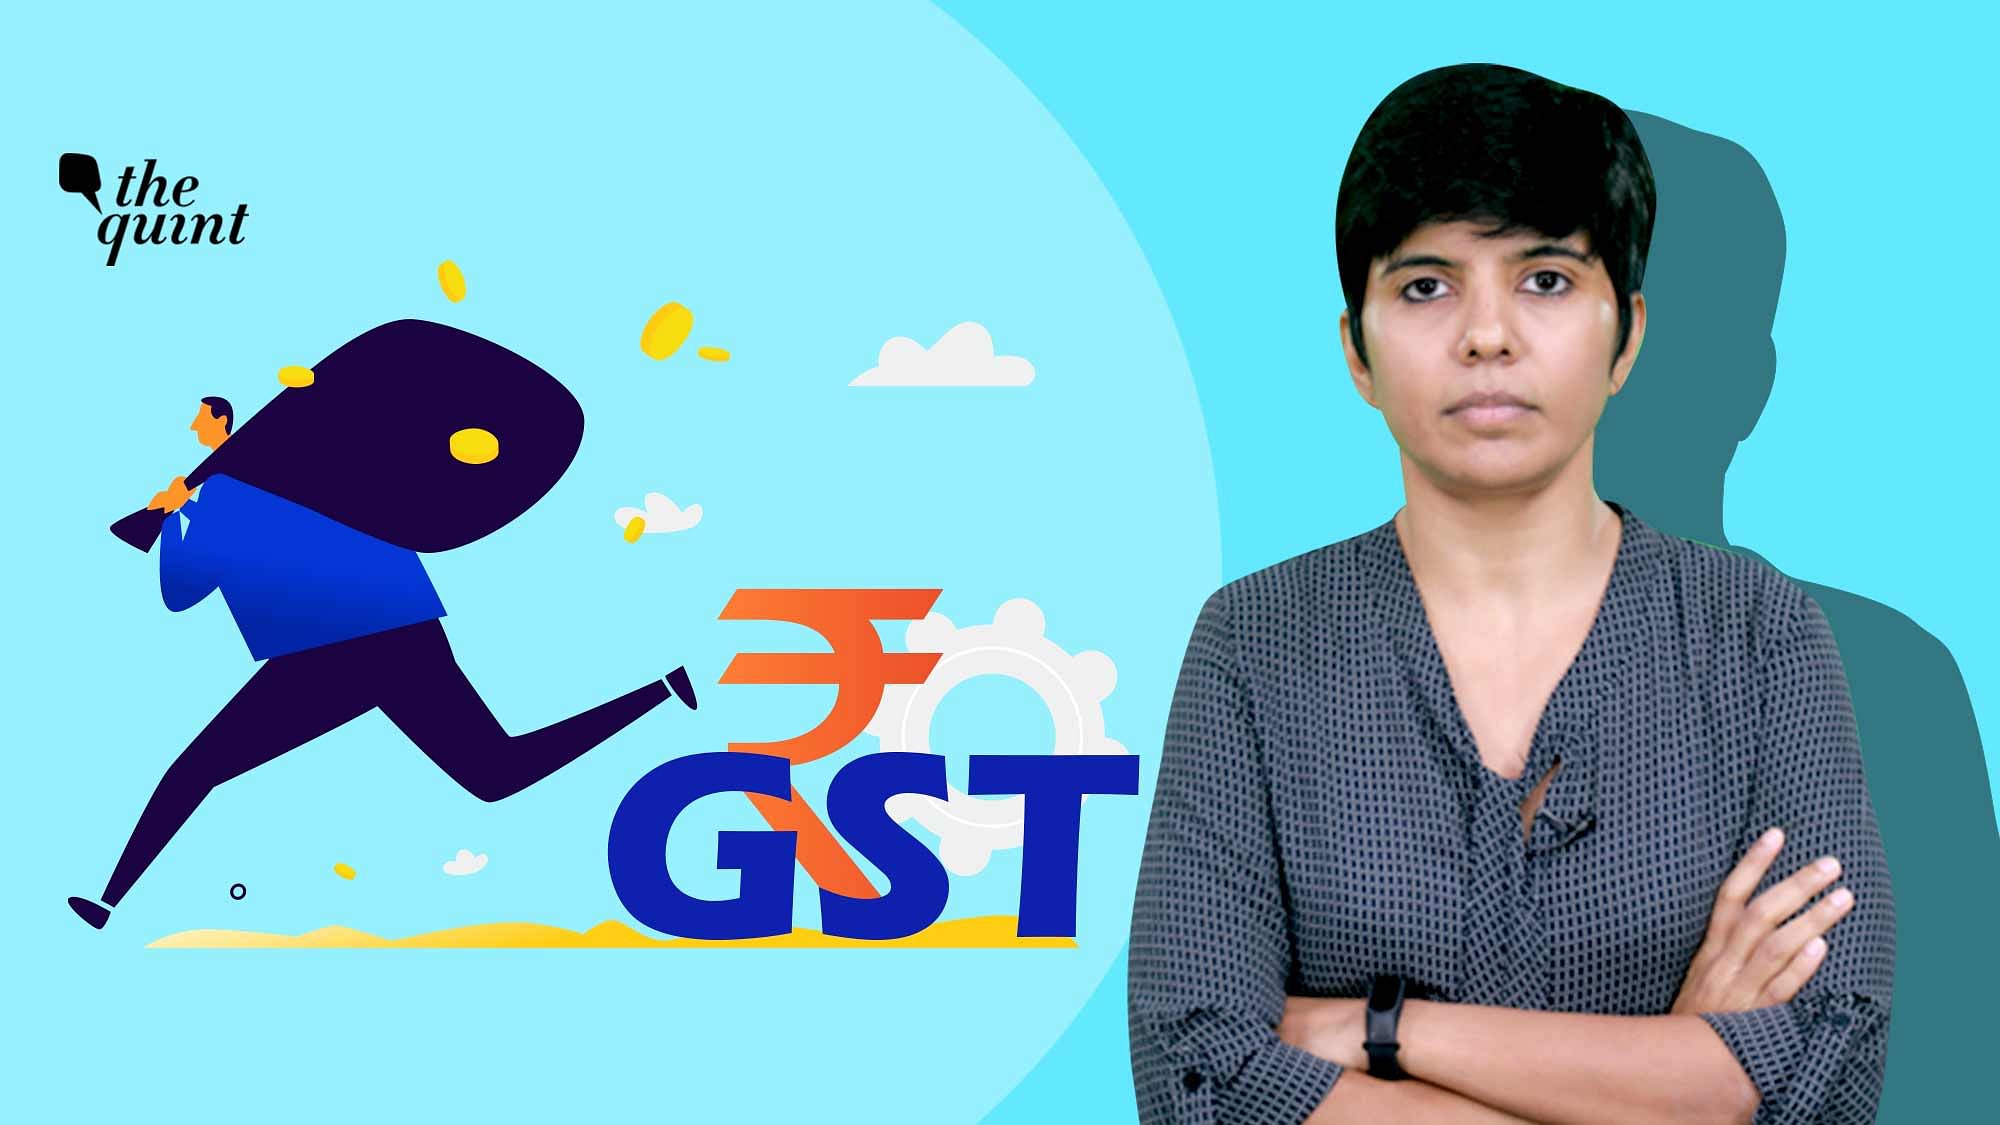  Do you know how easy is it to evade GST in the current system? Officials have told The Quint that the government can fix the leaky system but is not doing enough to stop GST evasion running into crore.&nbsp;